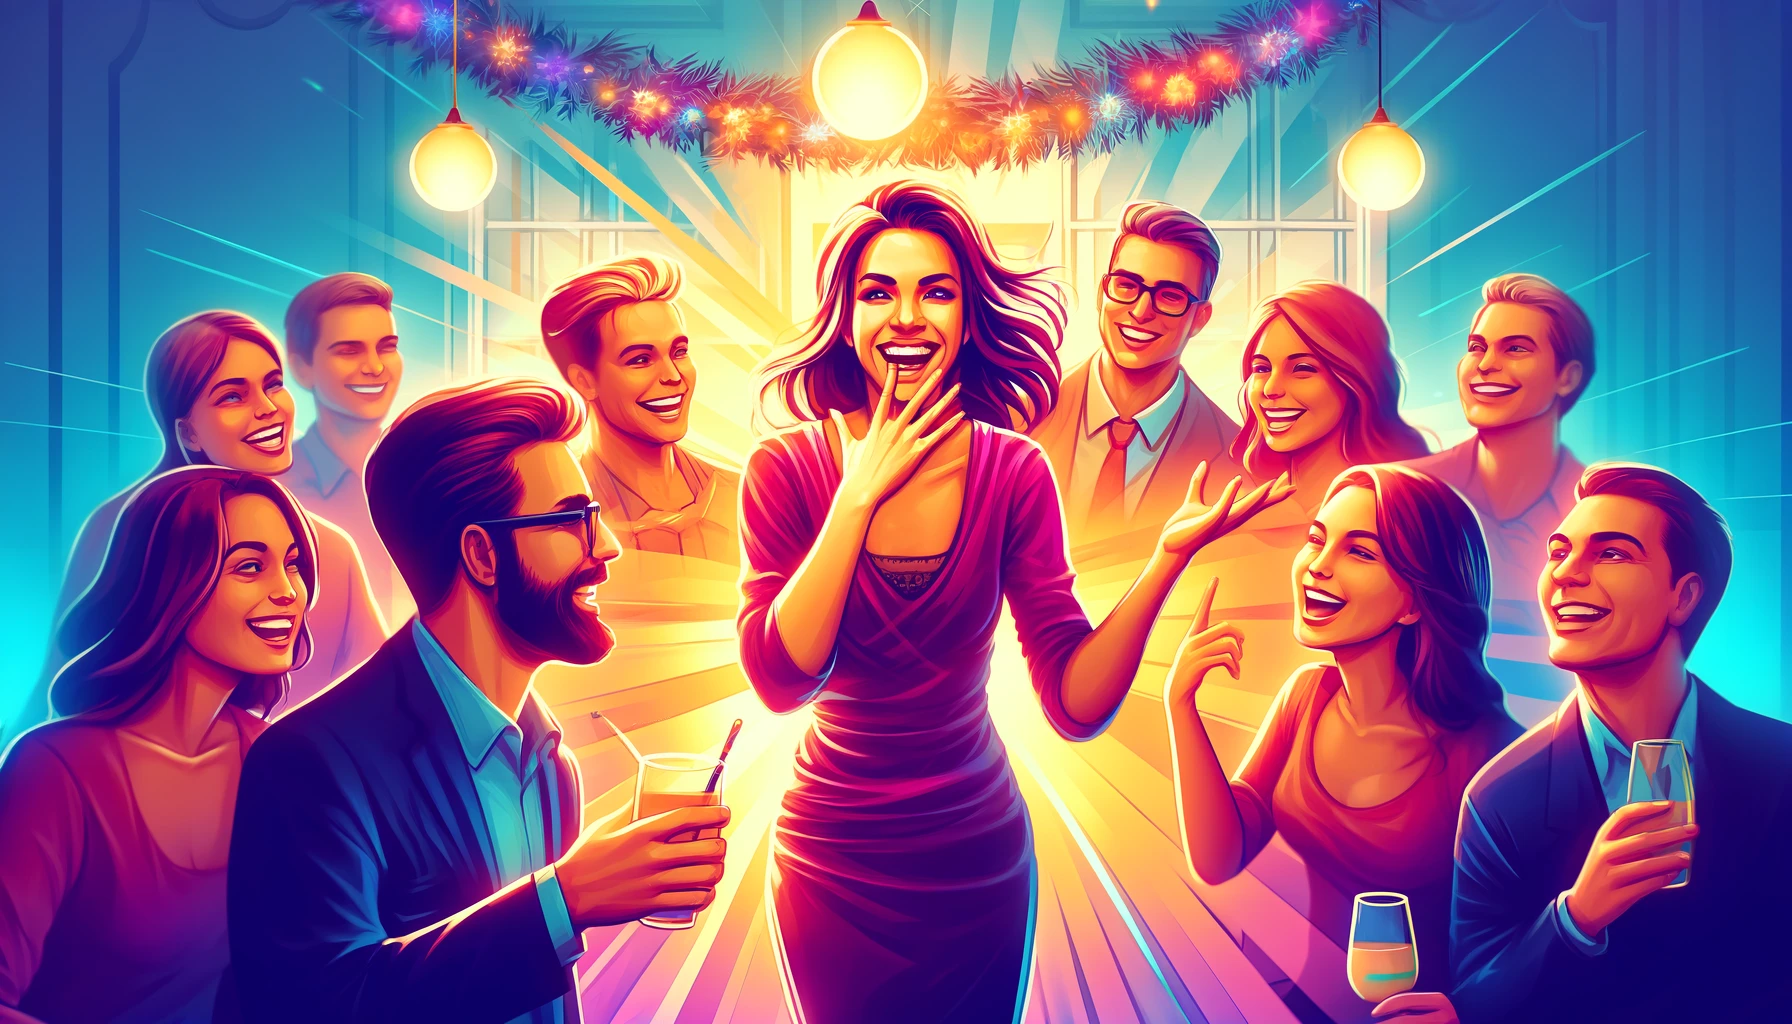 Lighting Up the Room: How to Become the Soul of the Party